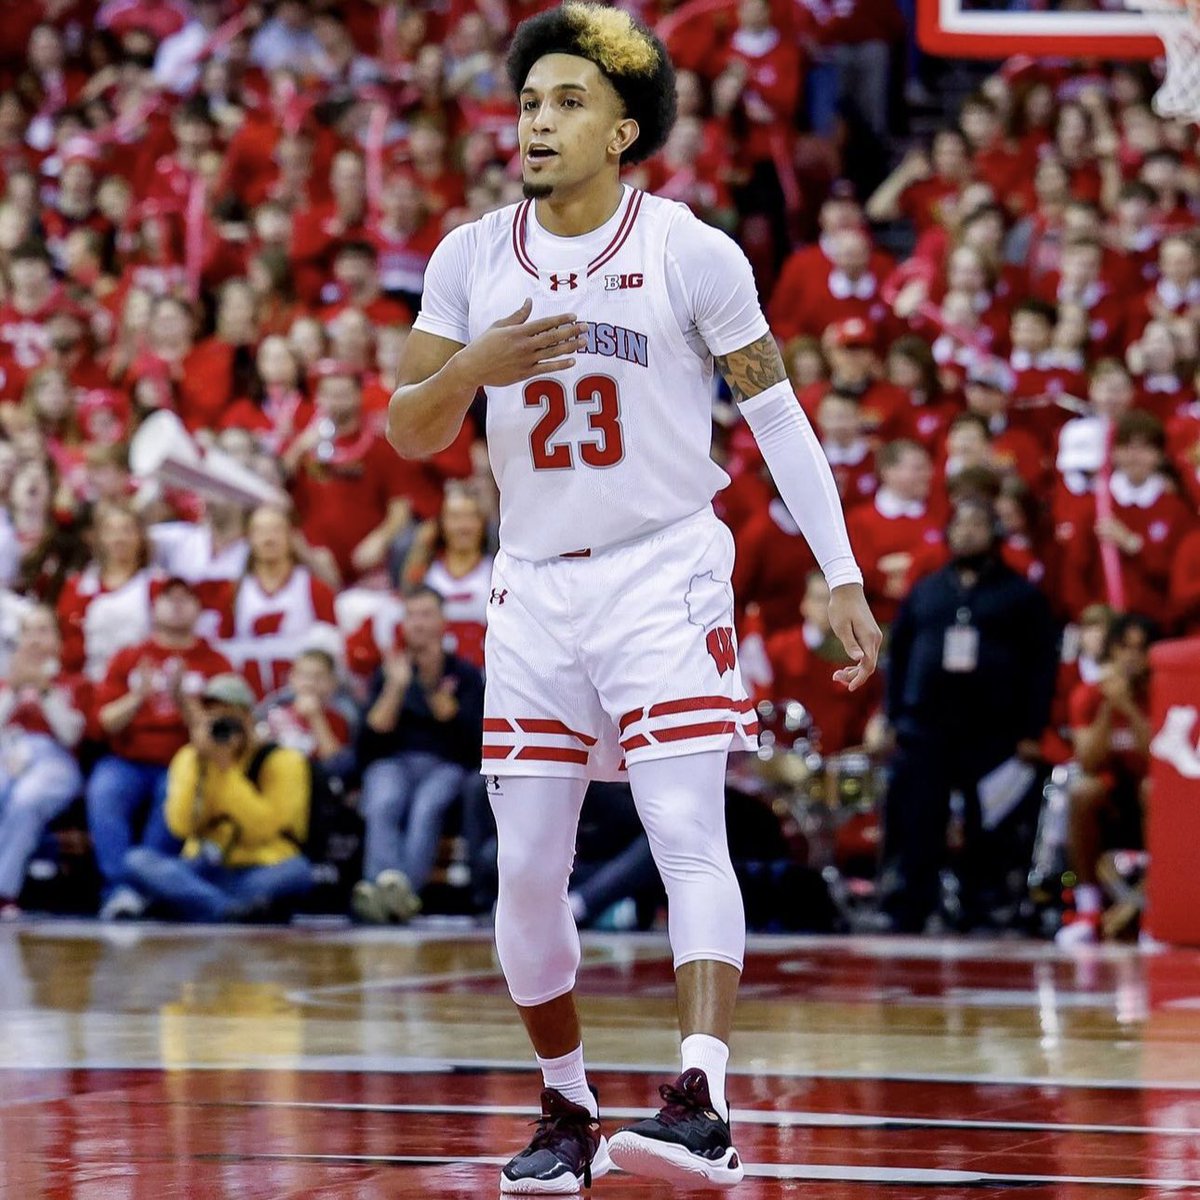 Wisconsin Guard Chucky Hepburn plans to enter the transfer portal. 🚨🔥 The 6-2 Junior averaged 9.2 PTS & 3.9 AST this season, and 12.2 PTS on 40.5% from 3PT range in 2022-23. @ChuckyHepburn (📸: @BadgerMBB)